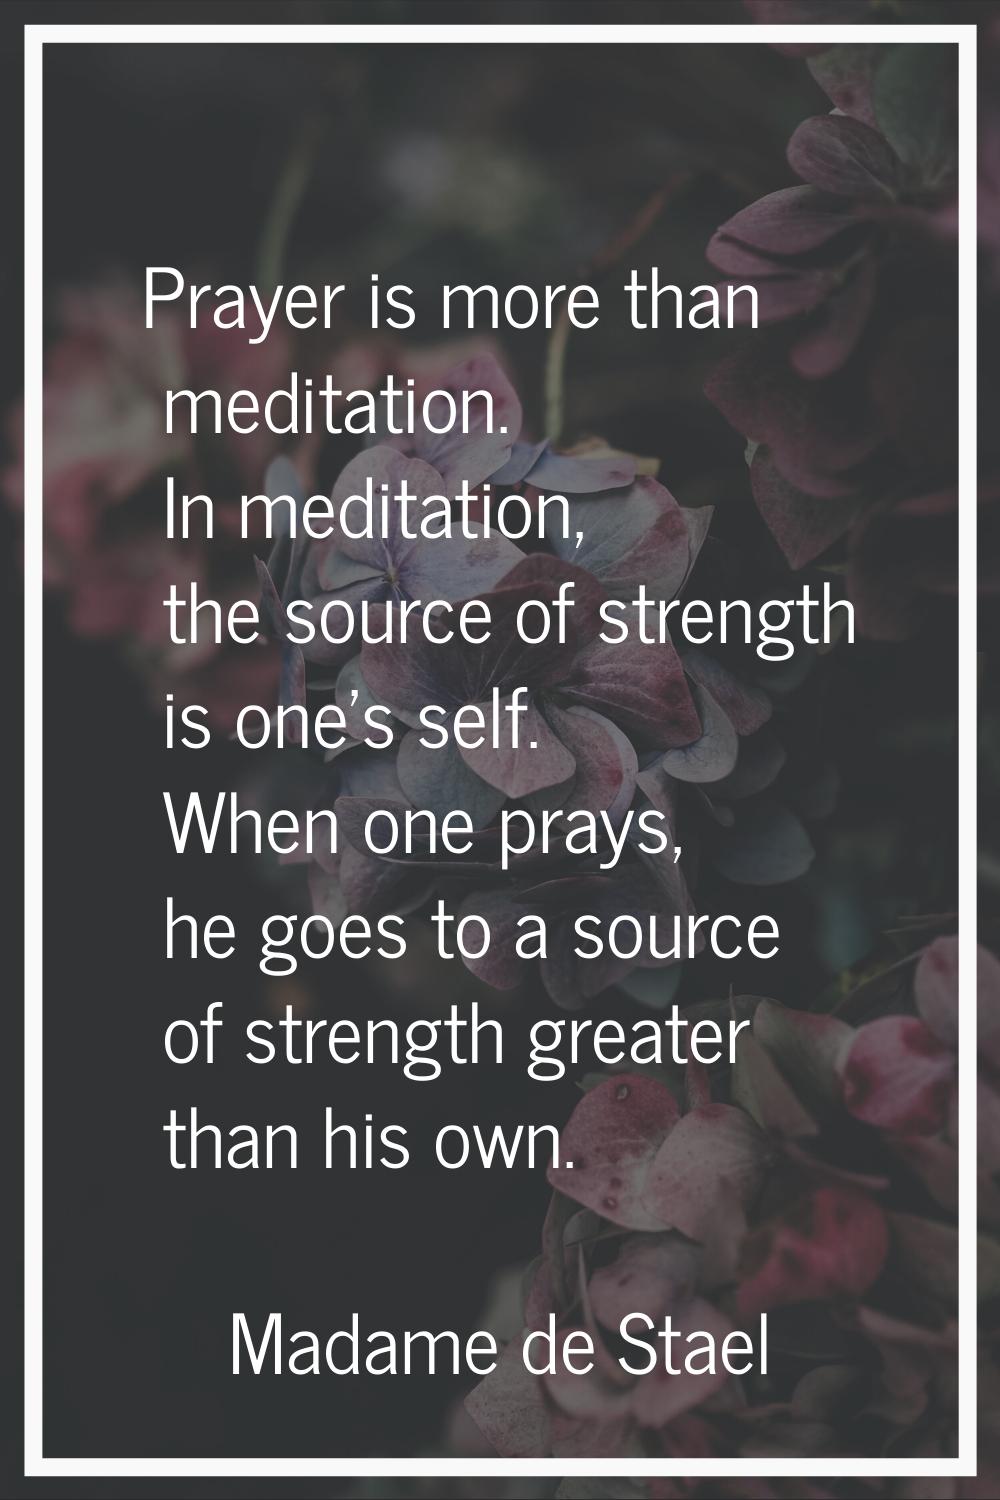 Prayer is more than meditation. In meditation, the source of strength is one's self. When one prays